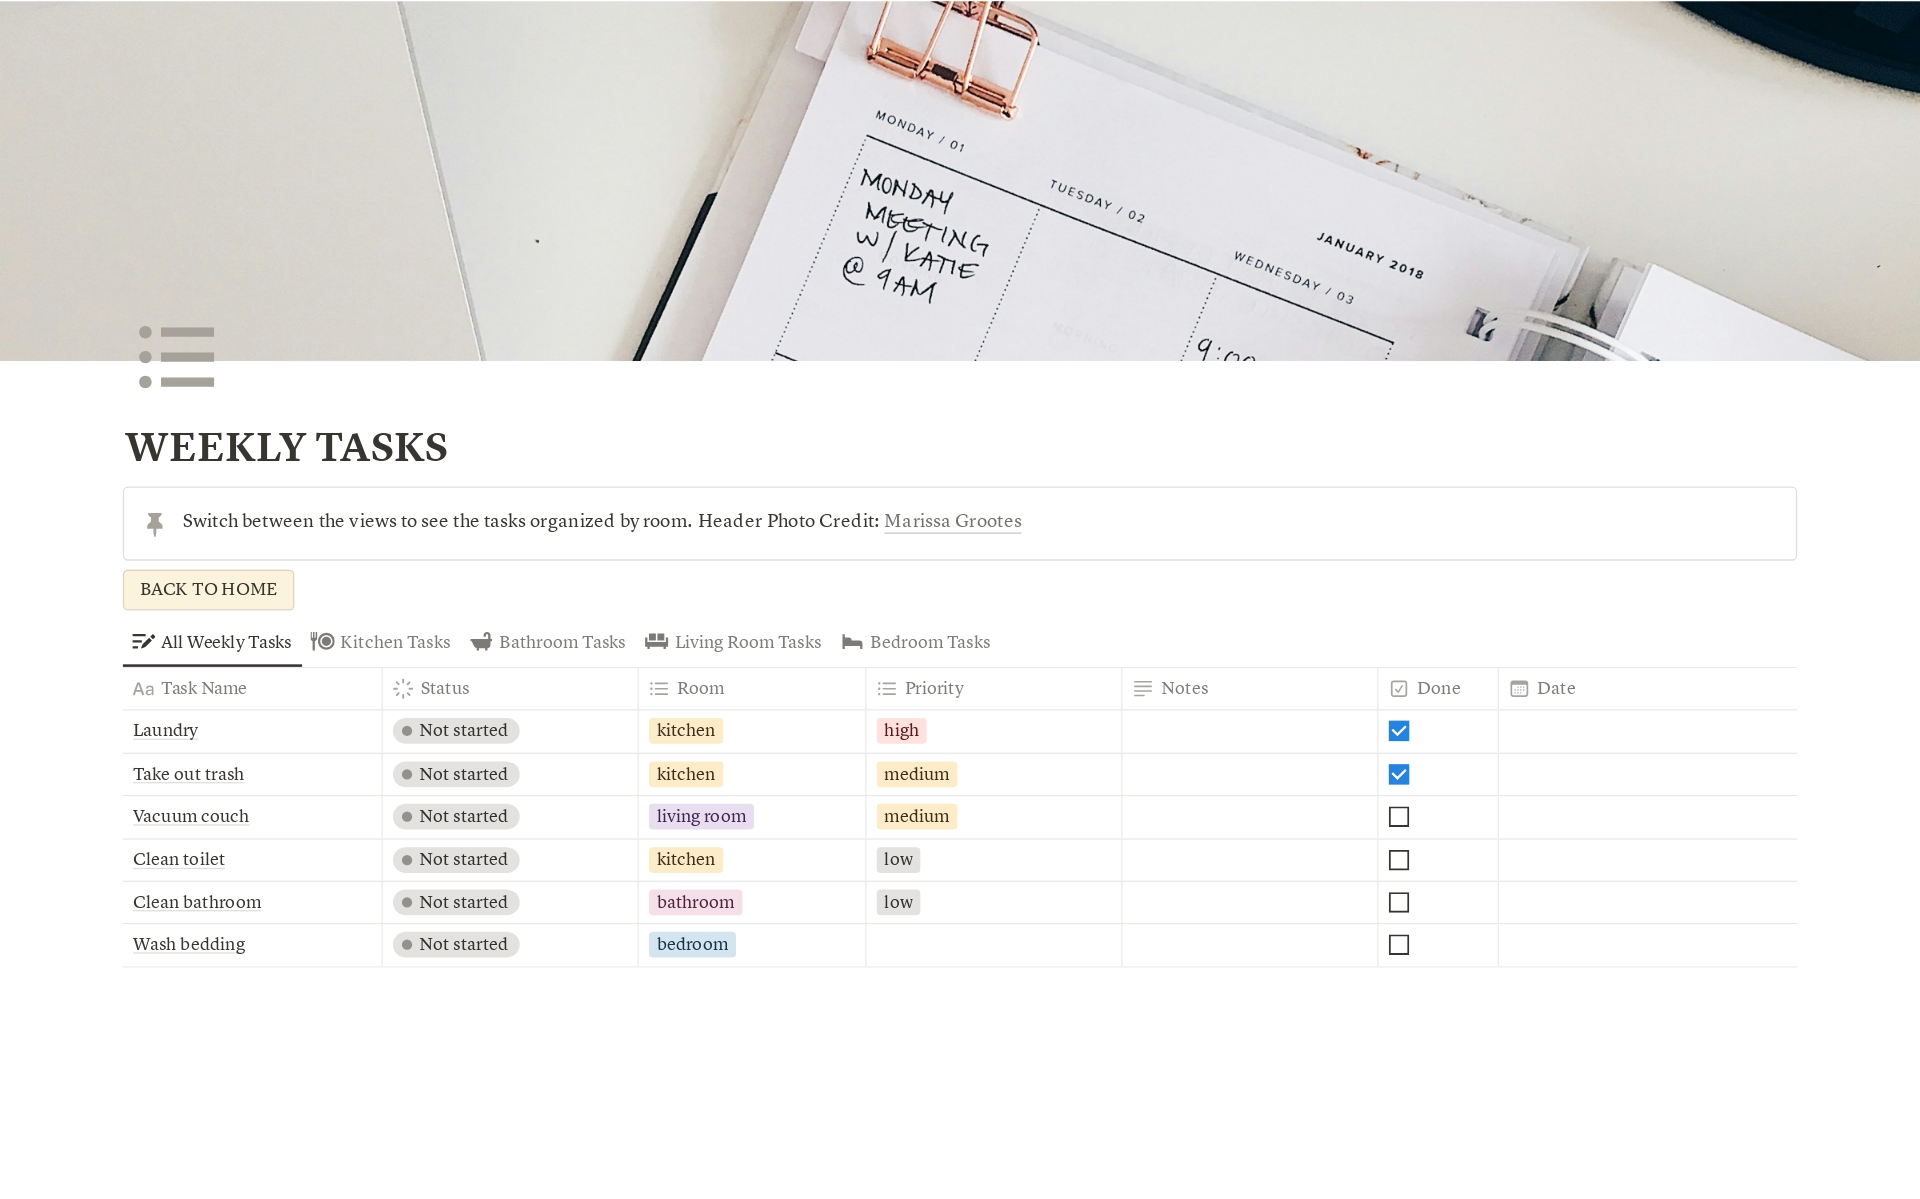 This template is designed to help you organize your cleaning tasks for your home. Complete with functional databases and buttons, this planner allows for a streamlined experience that gives you the option to organize tasks by room.